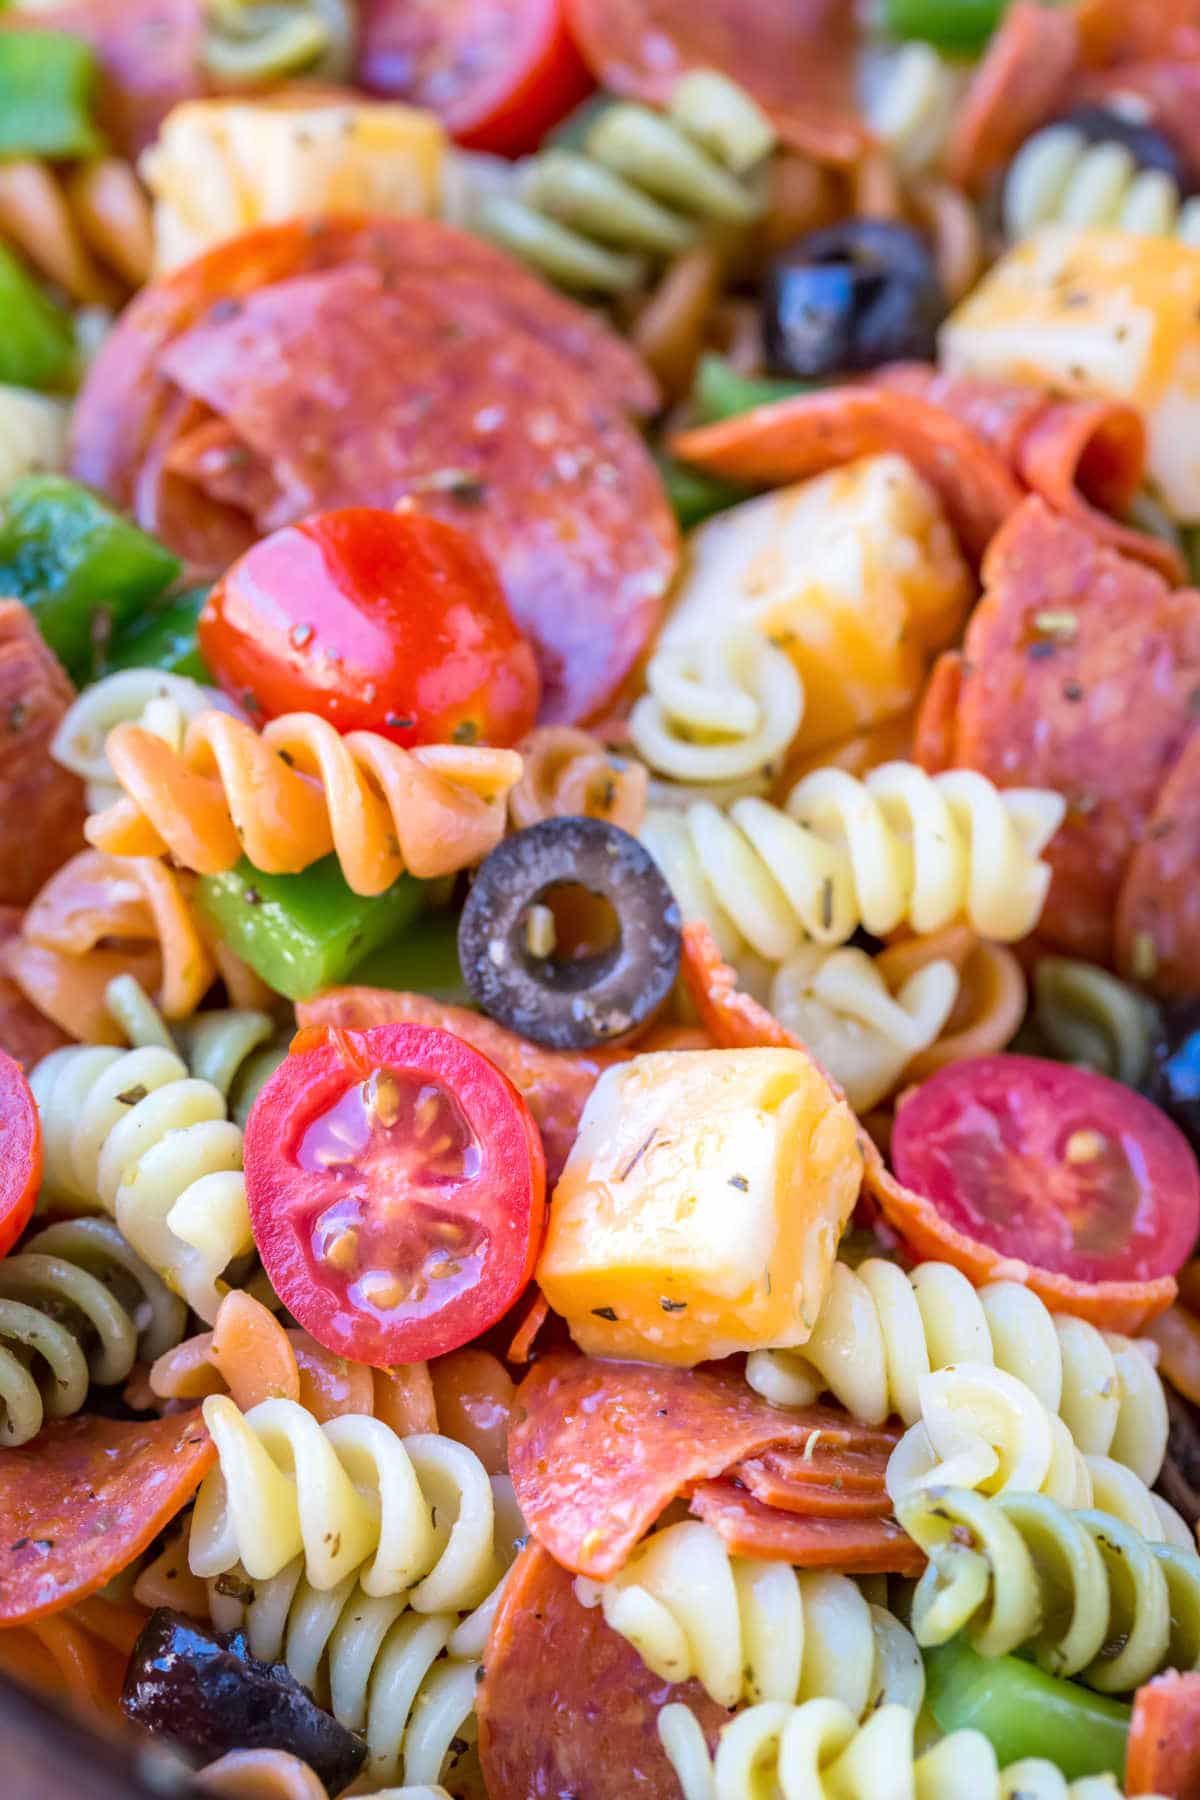 Pasta salad with pepperoni, olives, cheese, and tomatoes.